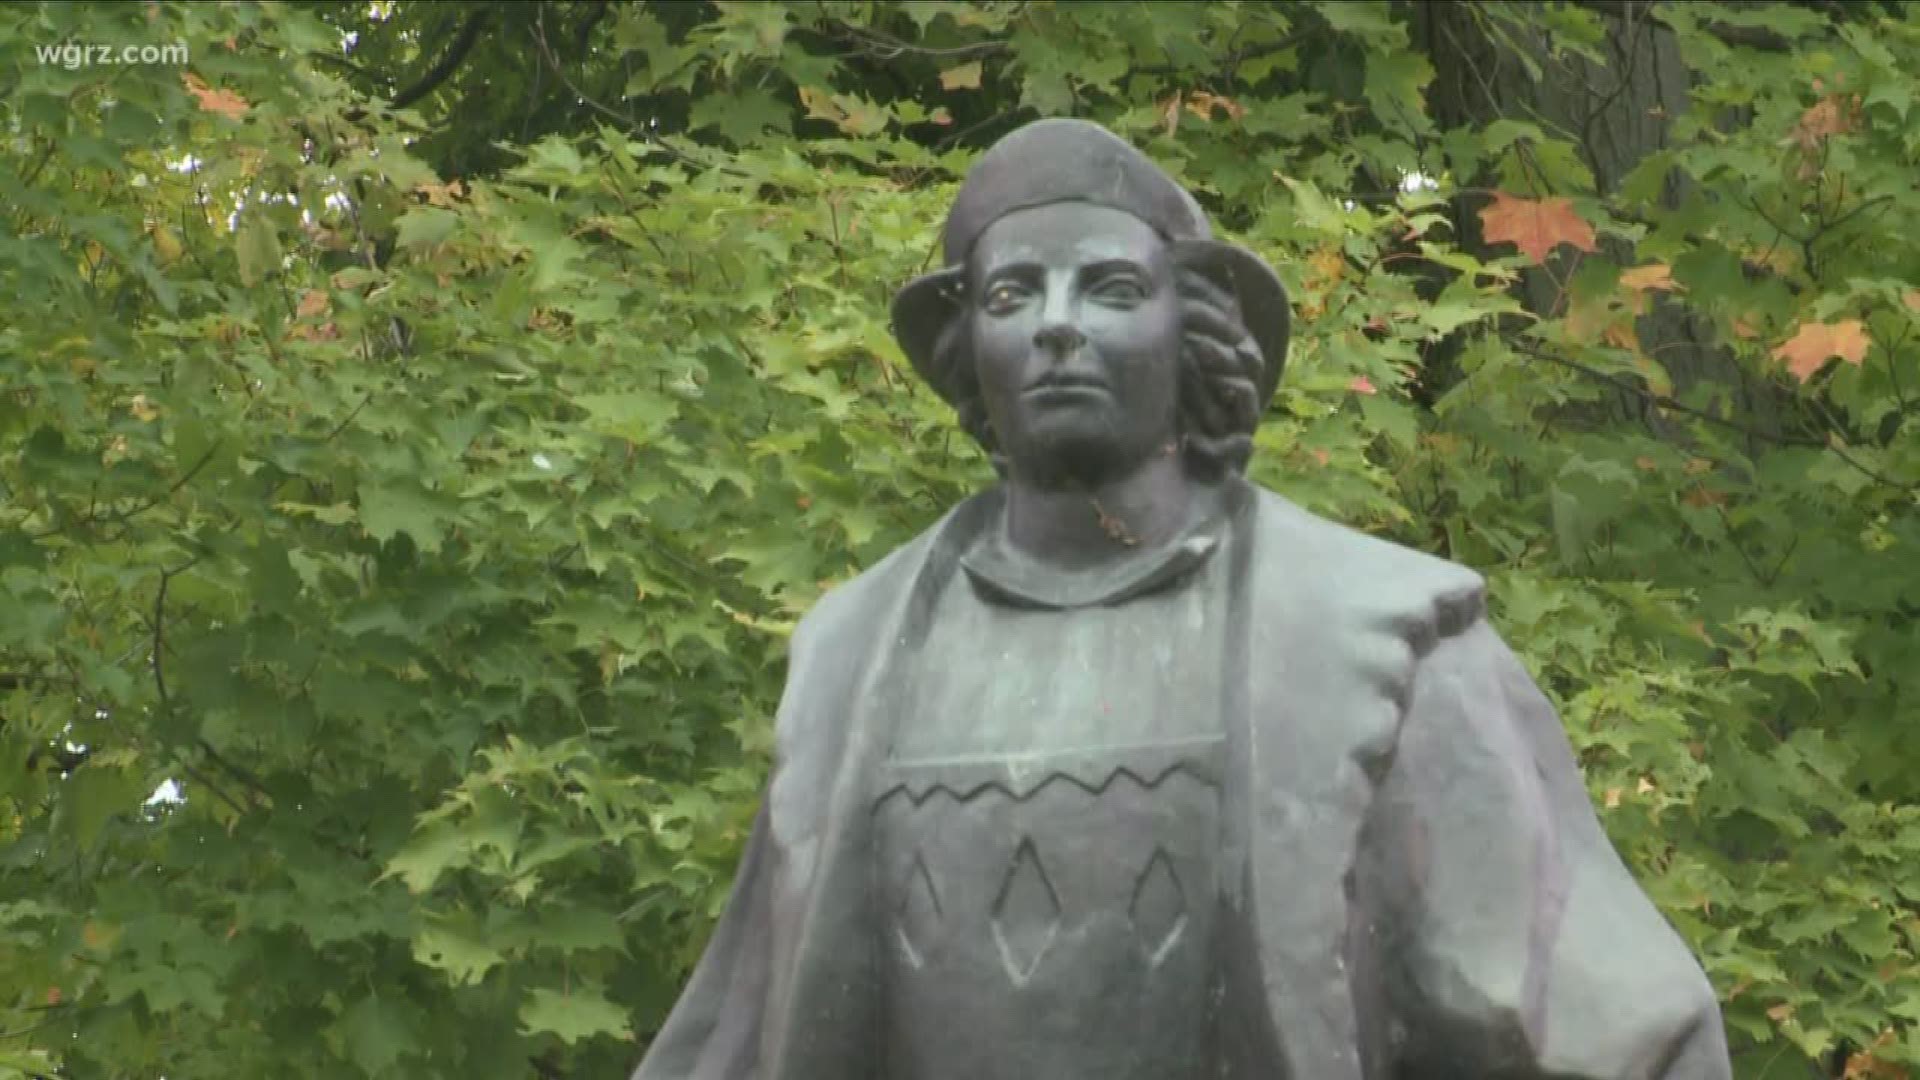 Columbus day stirs up controversy